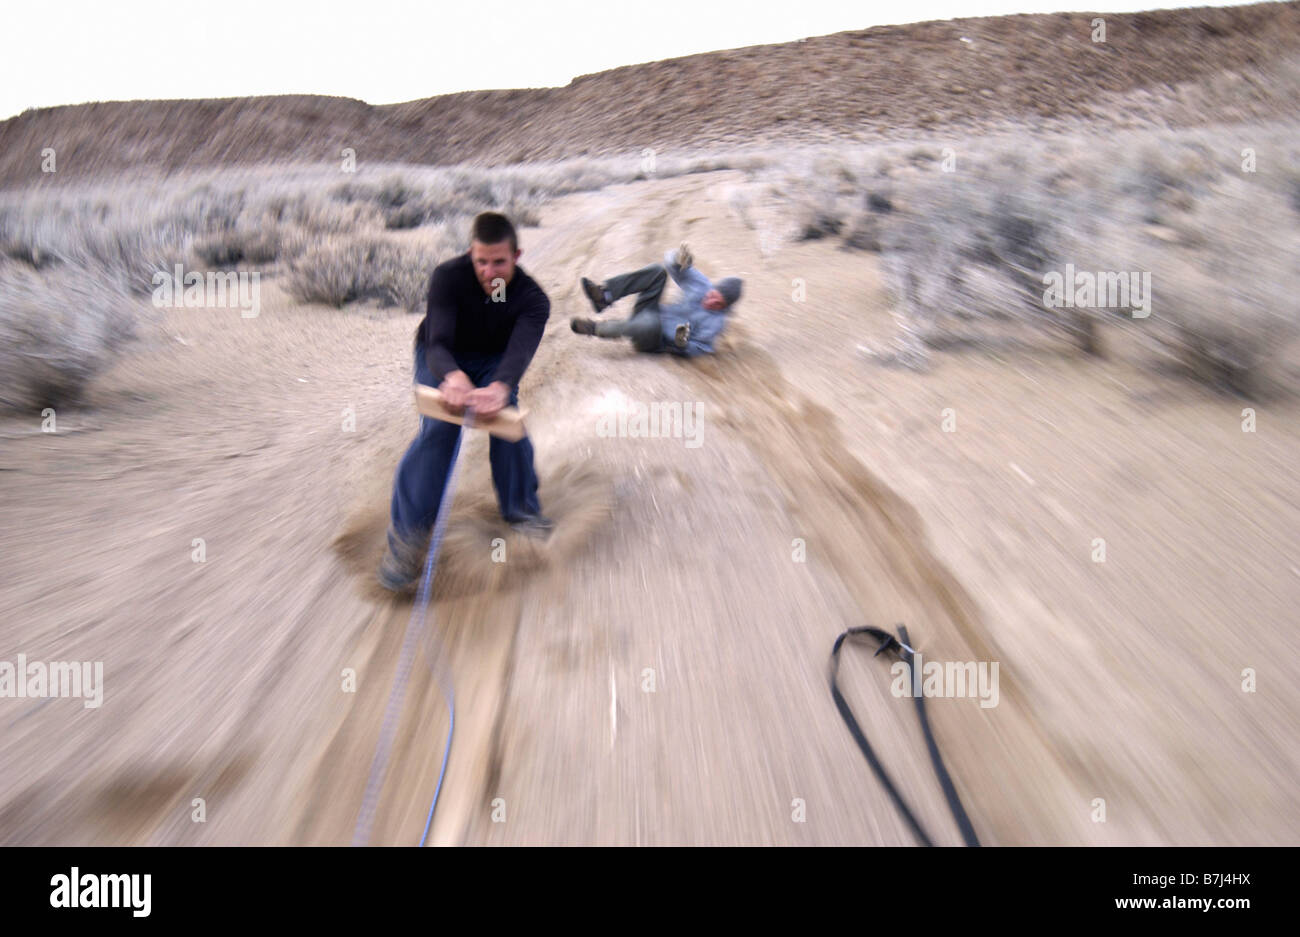 Two men (20-30) surfing behind a car on a dirt road, Bishop, California, USA Stock Photo